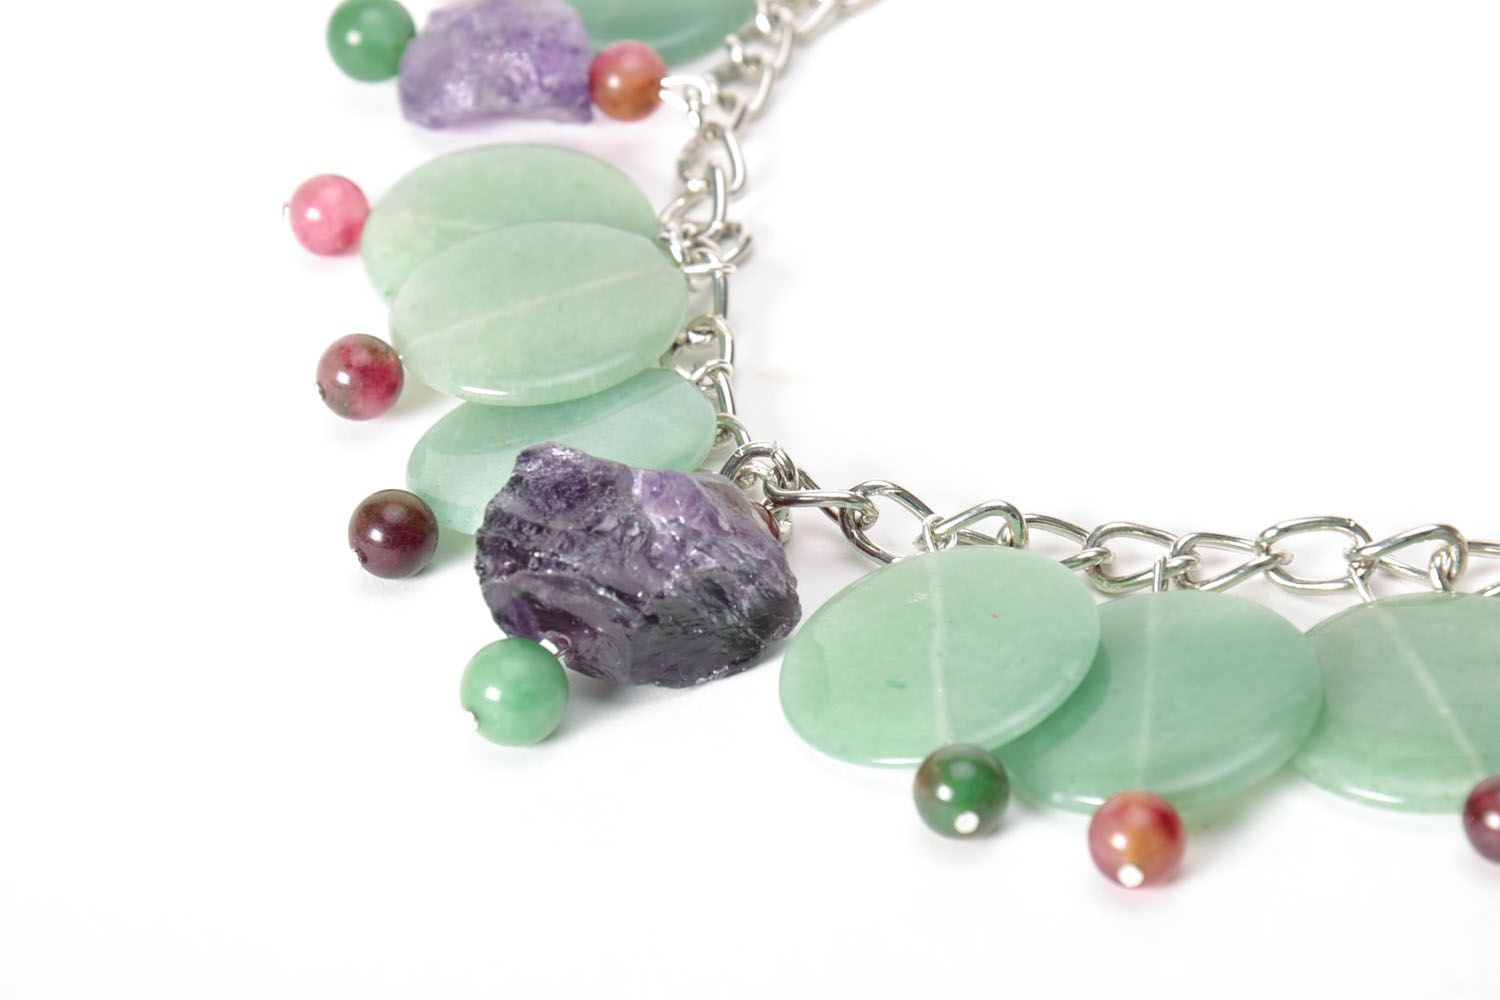 Homemade necklace with natural stones photo 4